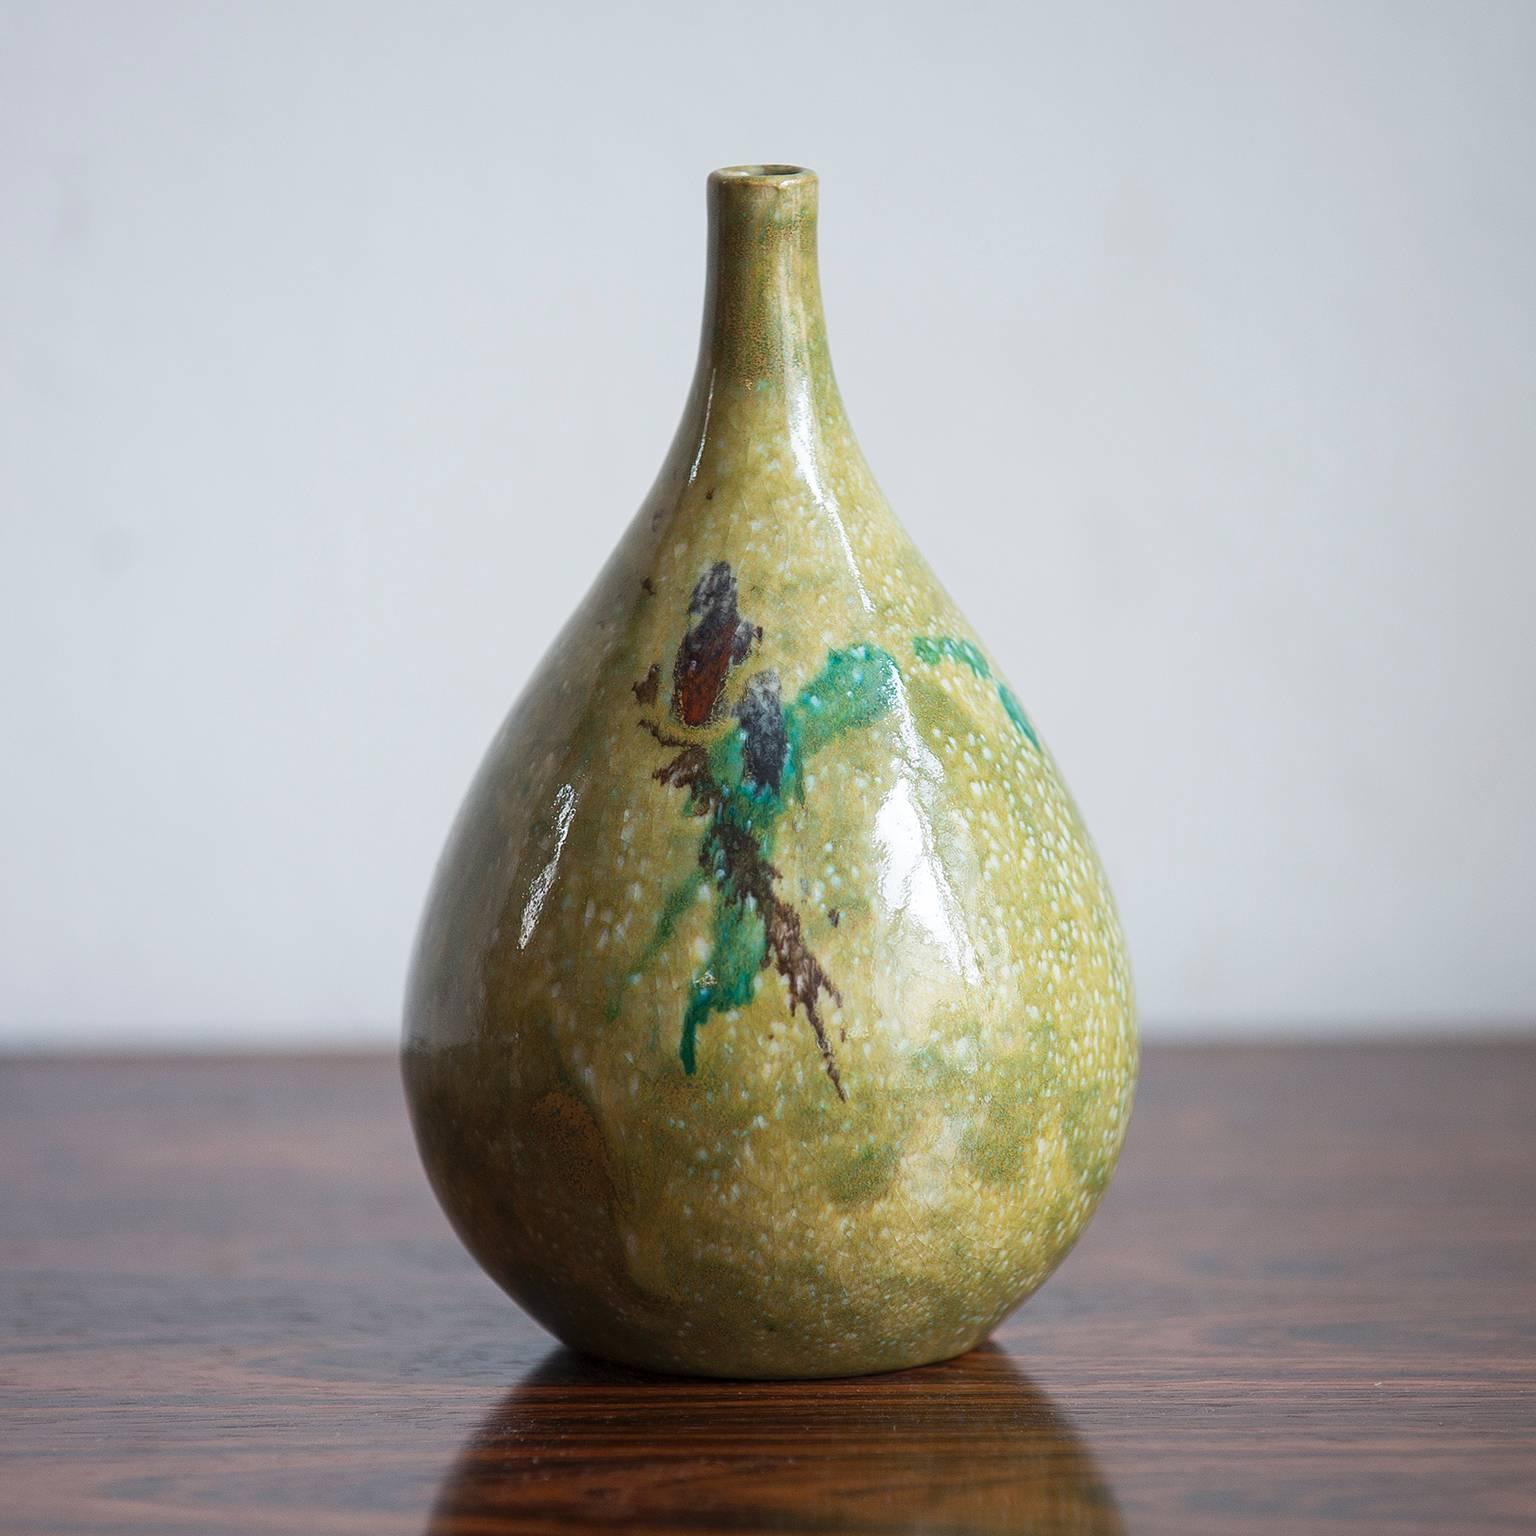 Nice vase by Andrea D'Arienzo, Italy, 1960. Geometric underglaze painting in turquoise and brown, green textured background. Andrea D'Arienzo worked with Guido Gambone in his studio in the 1960 decade.